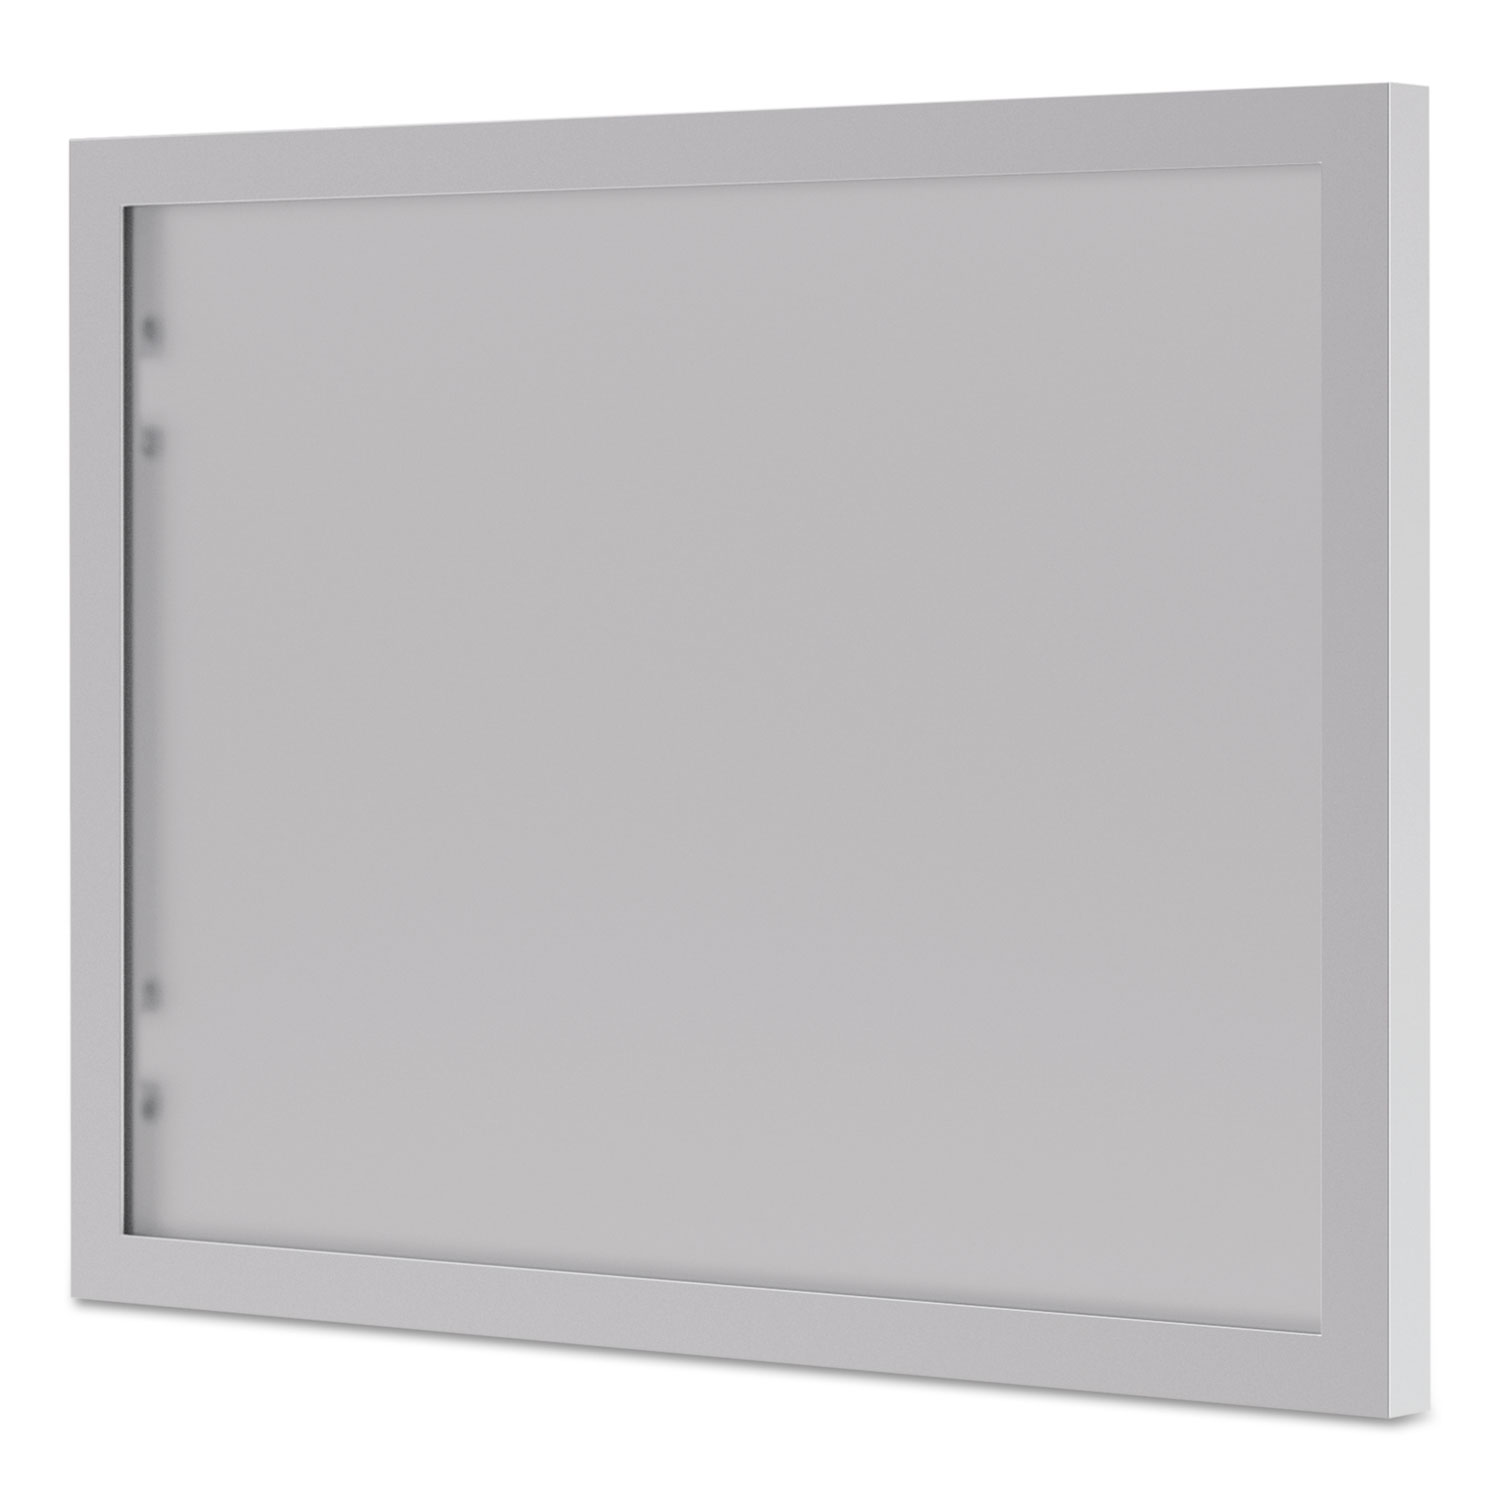 BL Series Hutch Doors, Glass, 13 1/4 x 17 3/8, Silver/Frosted